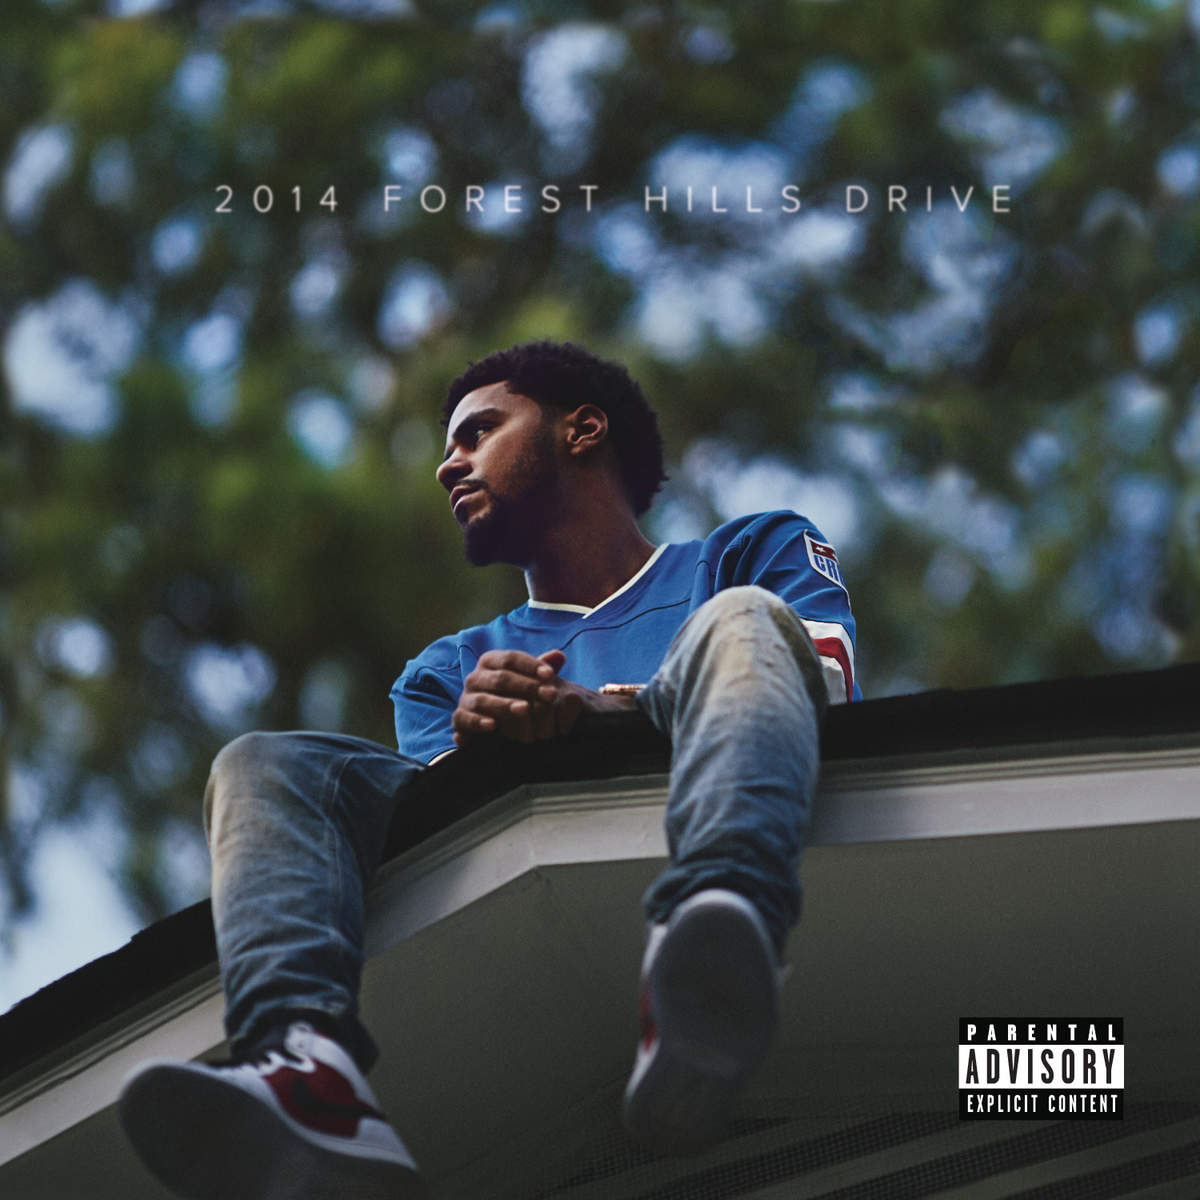 J. Cole achieves near-greatness with 2014 Forest Hills Drive